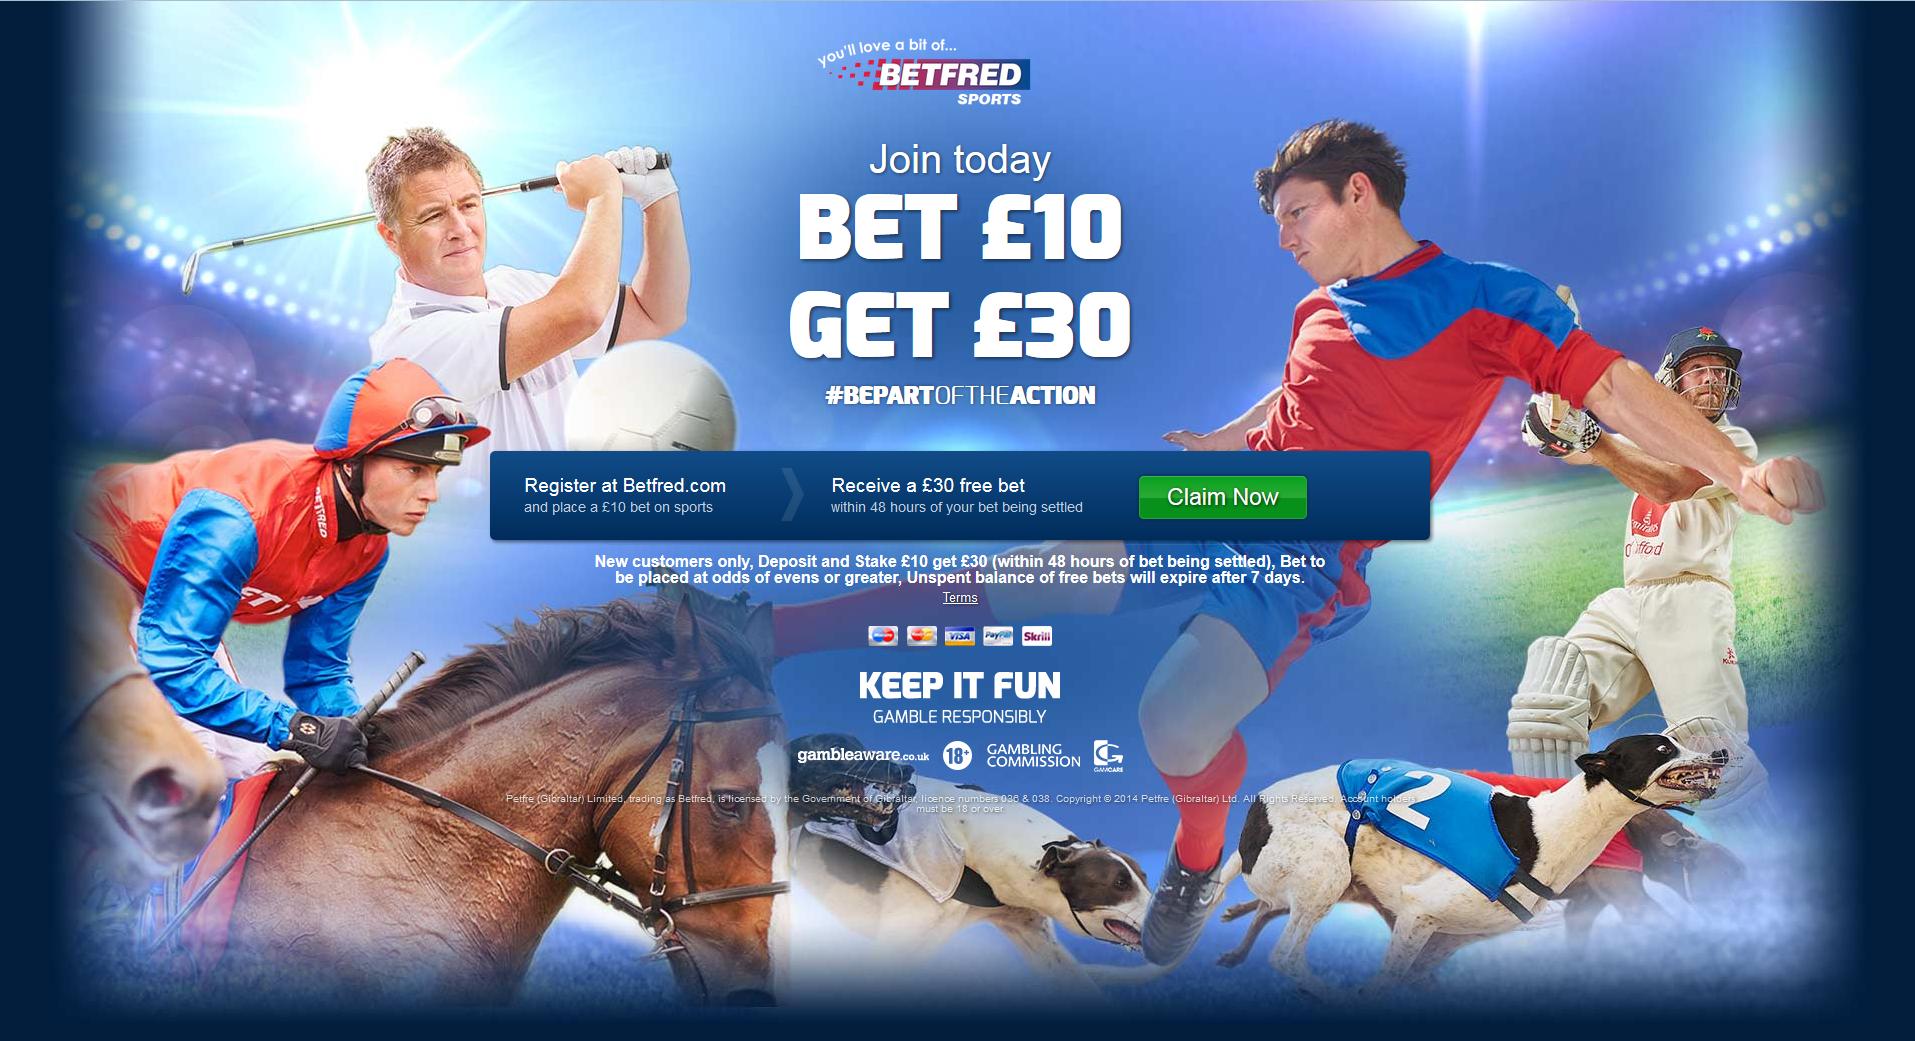 Online horse betting sites